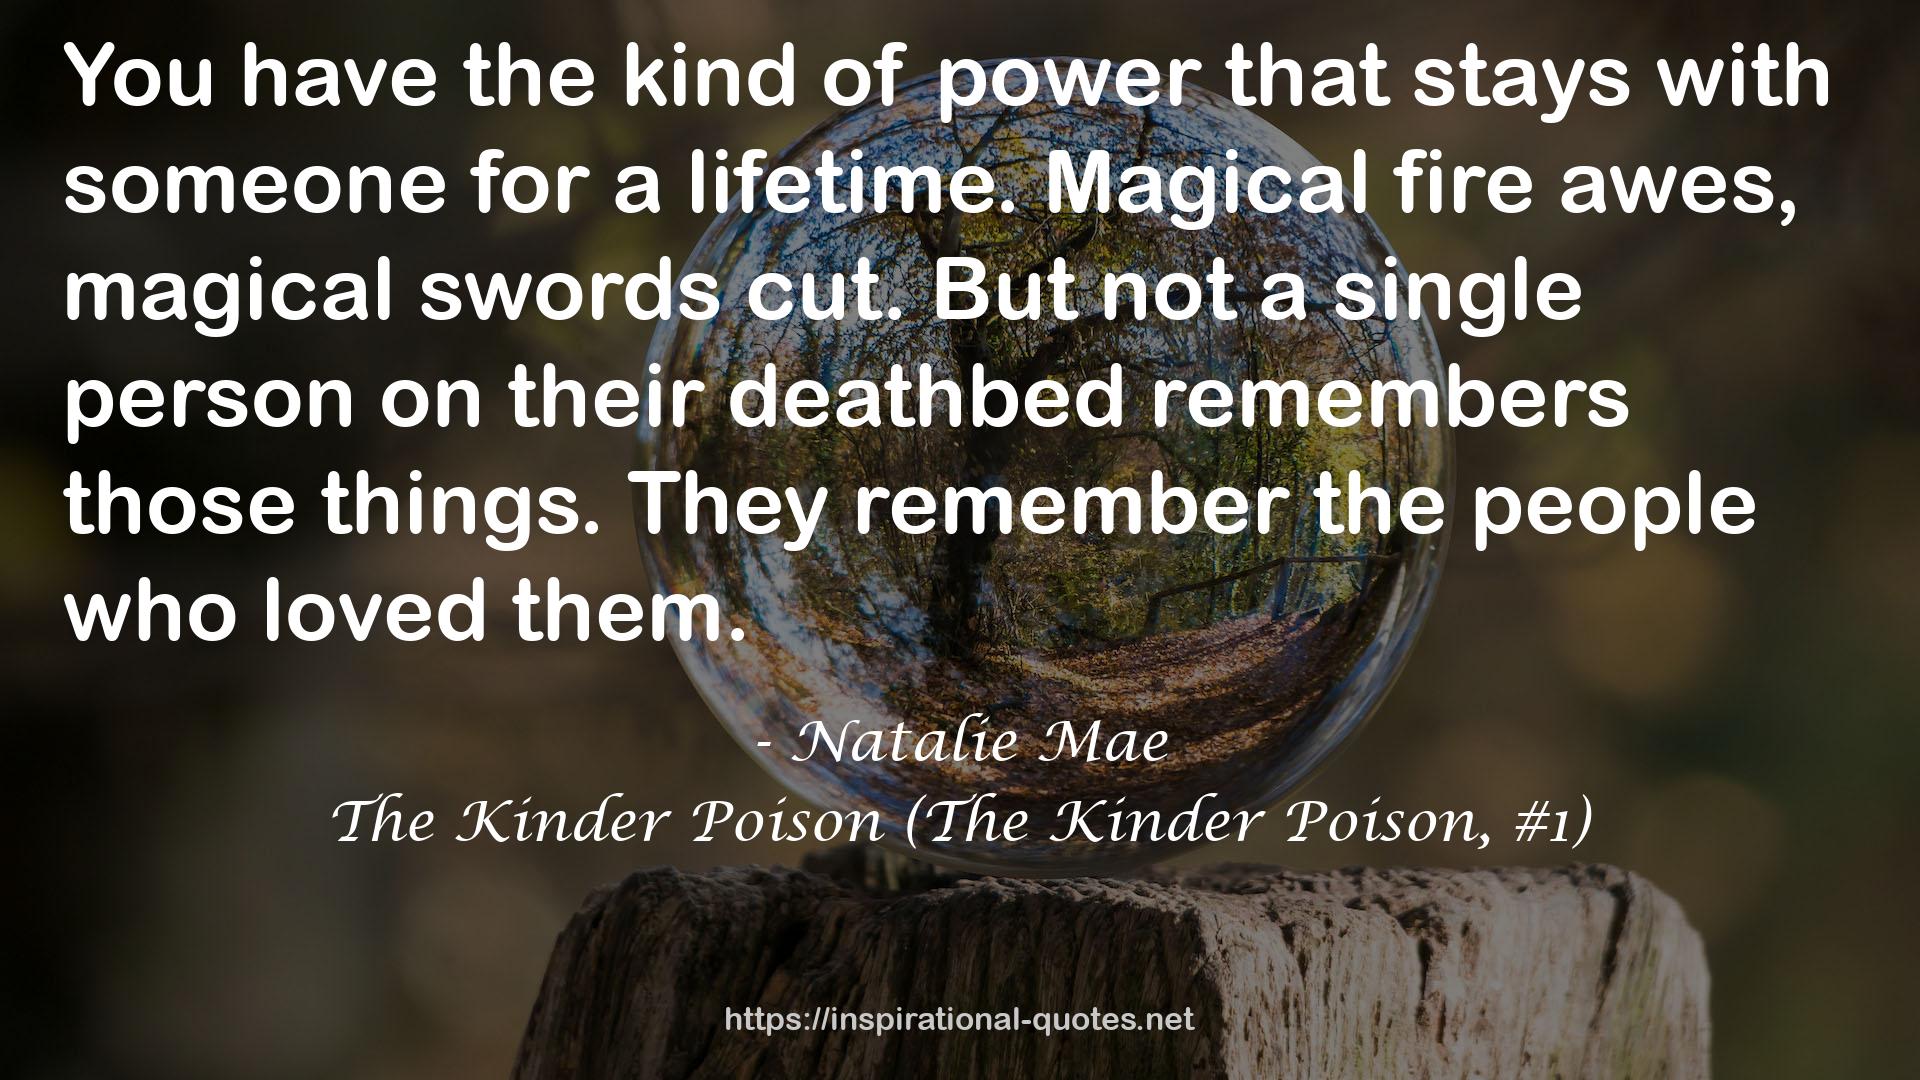 The Kinder Poison (The Kinder Poison, #1) QUOTES